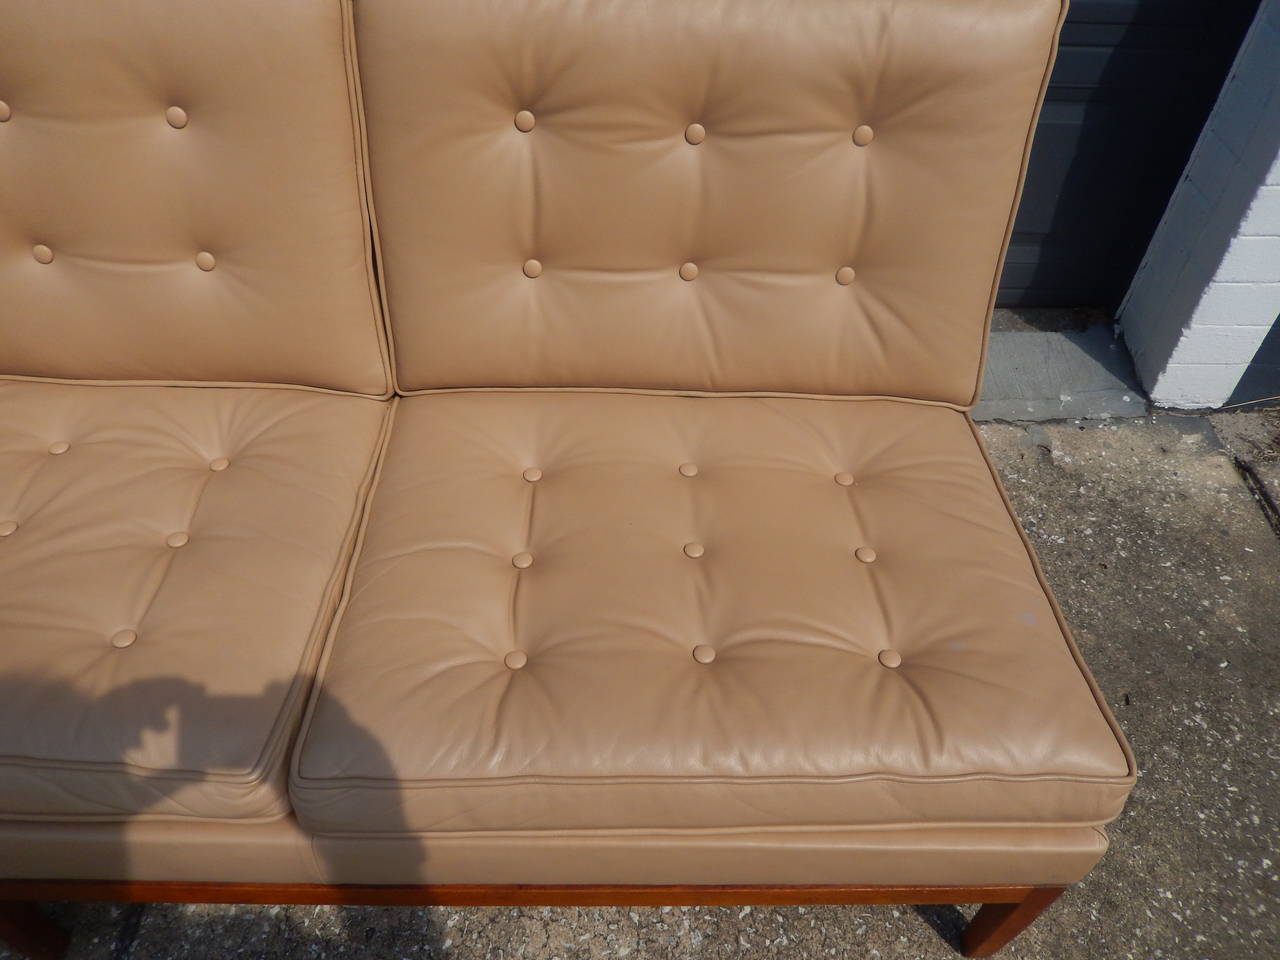 Superb armless three cushion sofa by Knoll Associates, dating the late 1960s. Six leg frame with six tufted leather cushions. Very good overall condition.

Knoll label still present, as seen in photographs. Very minor wear to leather, including a